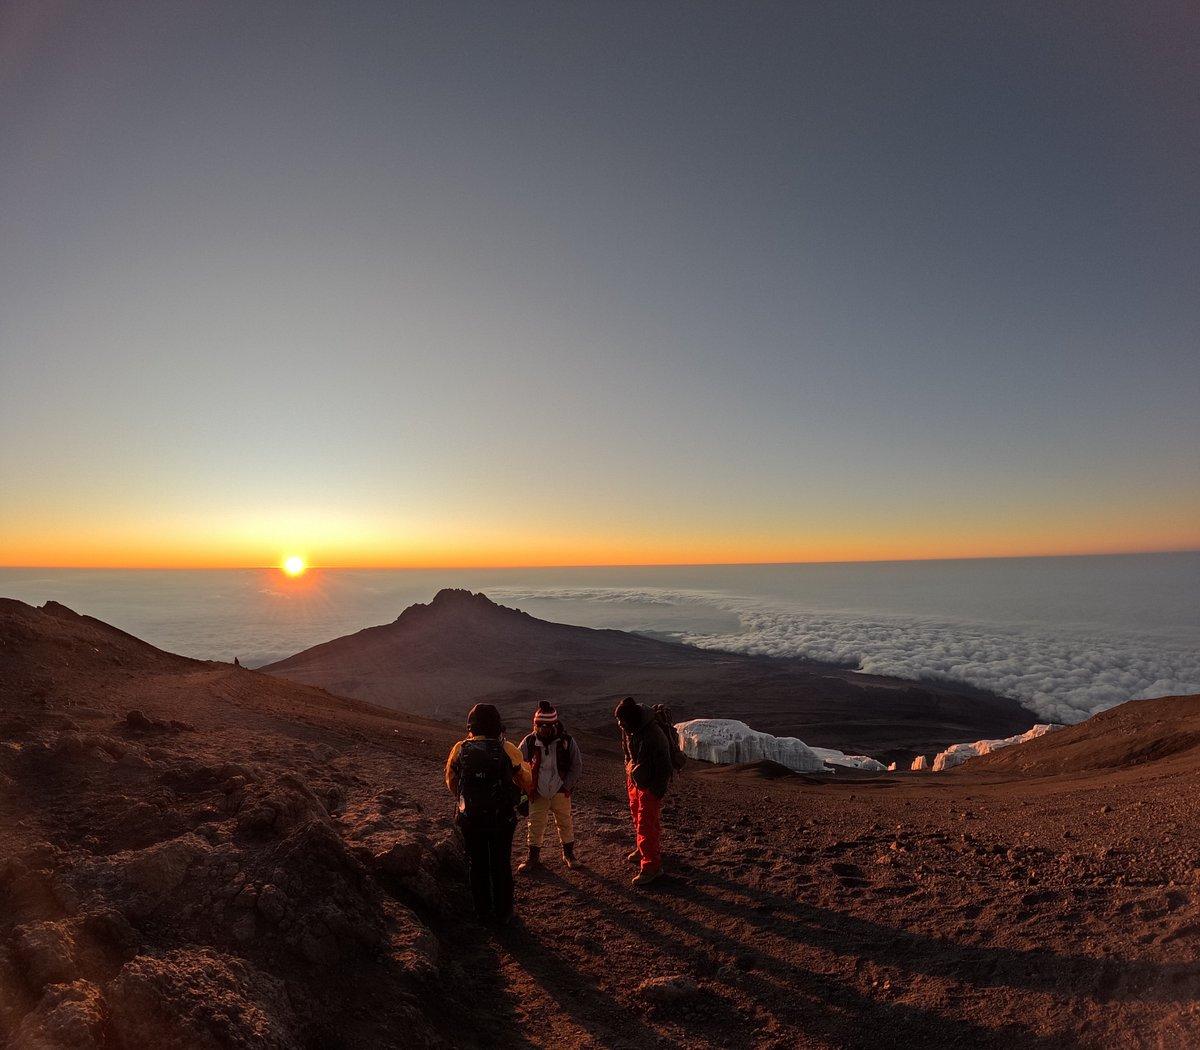 WHAT IS THE MOST BEAUTIFUL KILIMANJARO CLIMBING ROUTE?